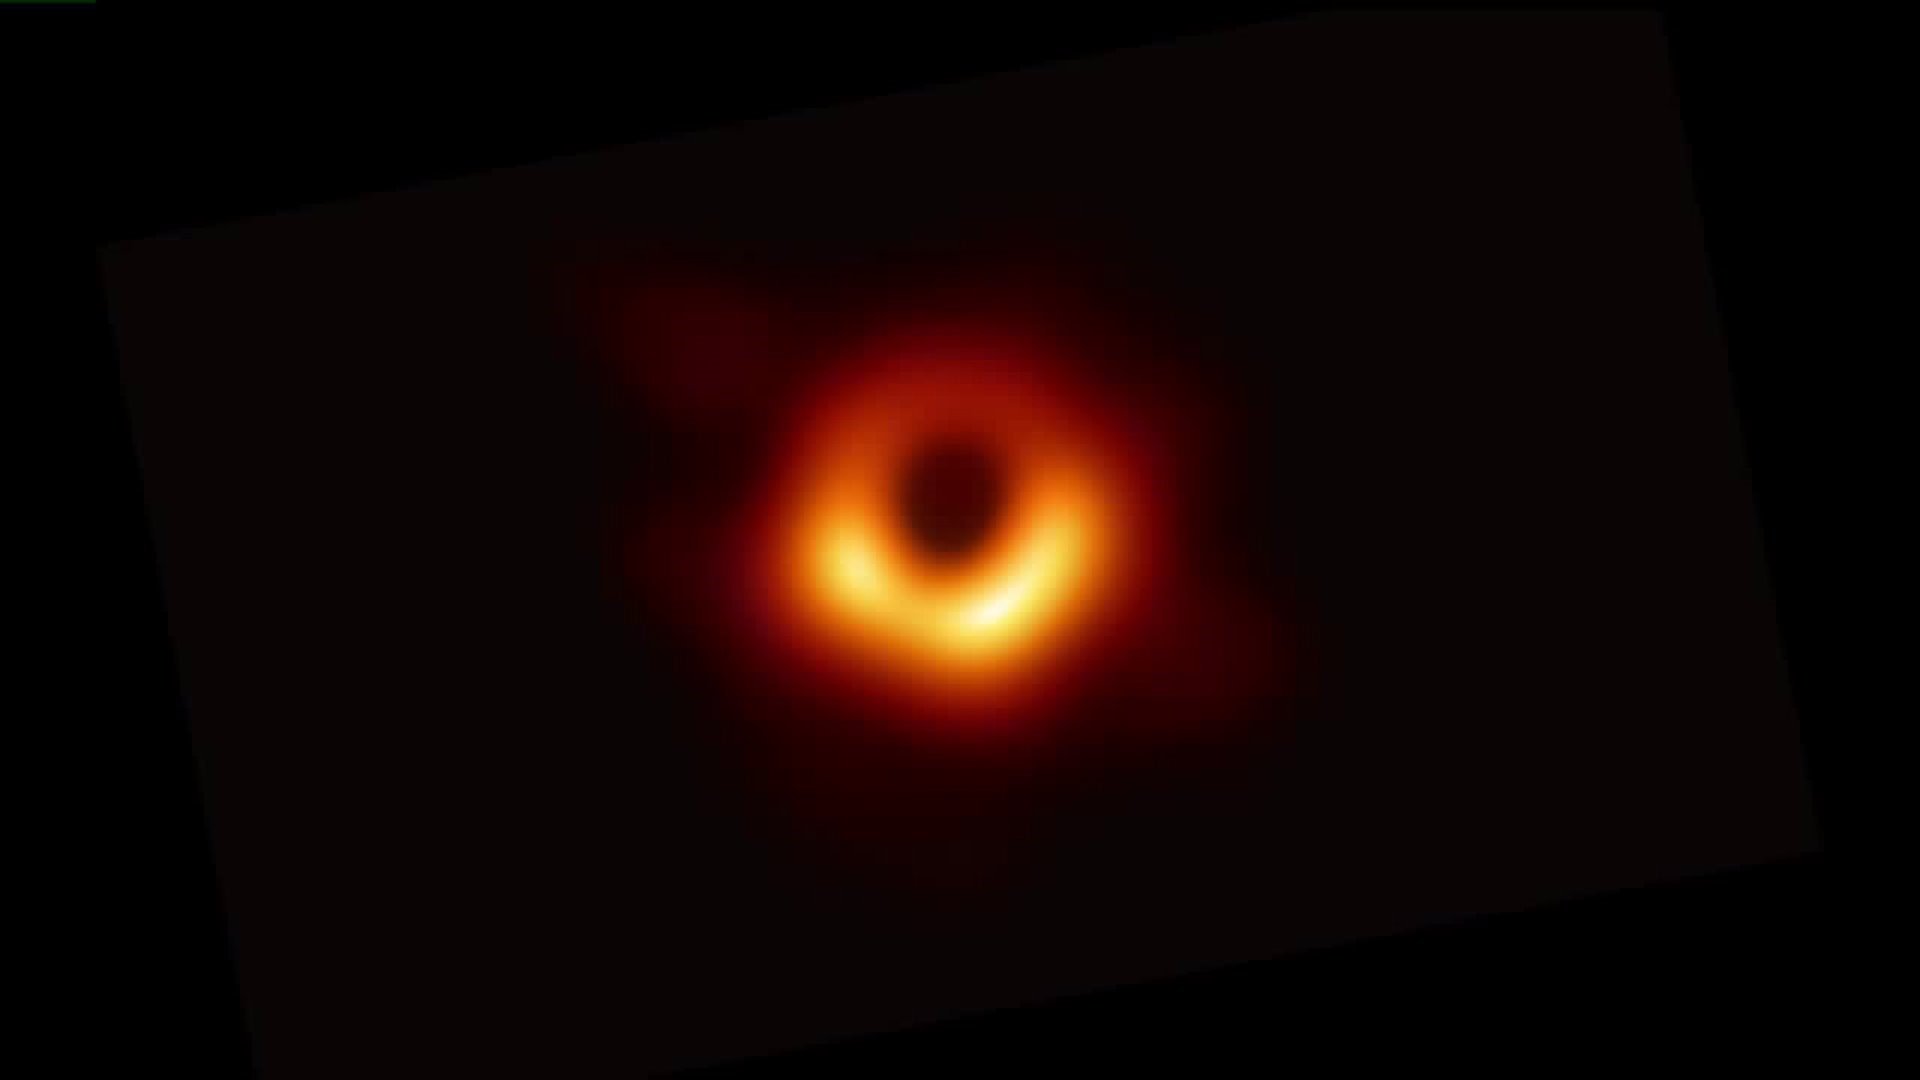 This is the first ever photo of a black hole